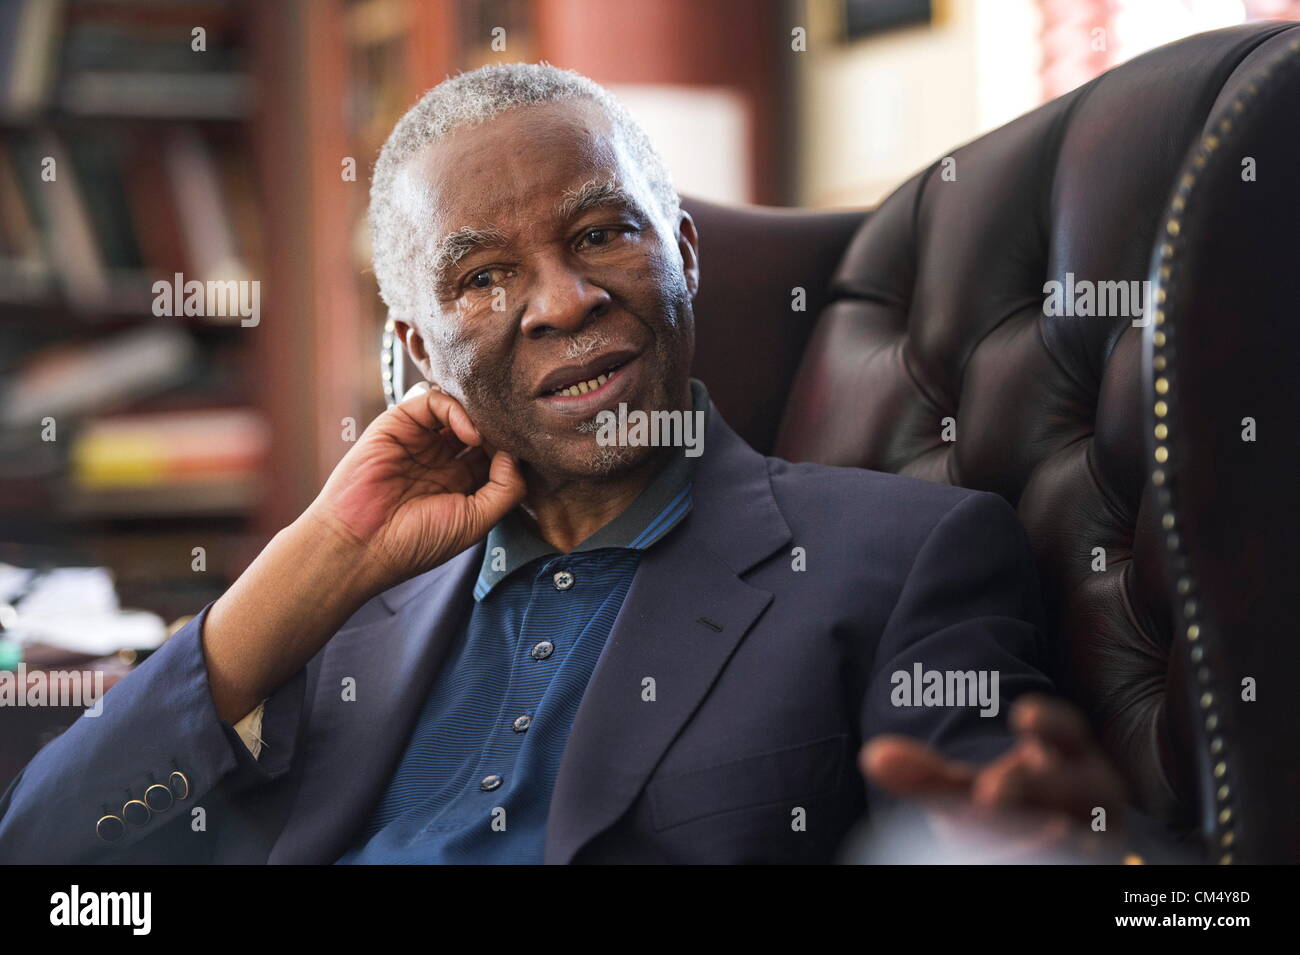 JOHANNESBURG, SOUTH AFRICA: Former South African president Thabo MBeki talks about South Africa's roll in the development of the continent at his home on October 4, 2012 in Johannesburg, South Africa. (Photo by Gallo Images / Foto24 / Nicolene Olckers) Stock Photo